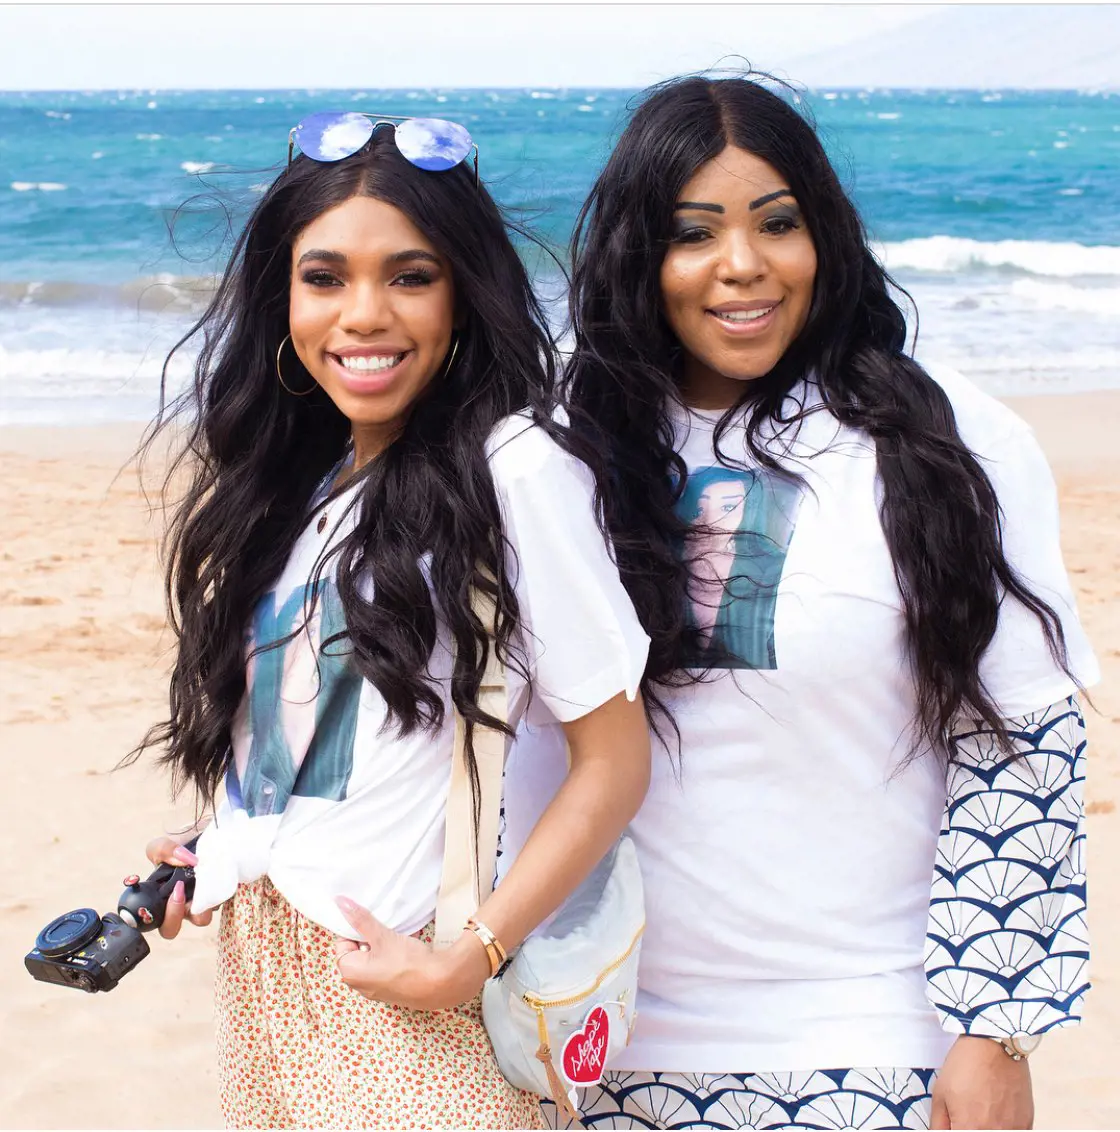 Teala posted a photo with her mum at the beach captioned 